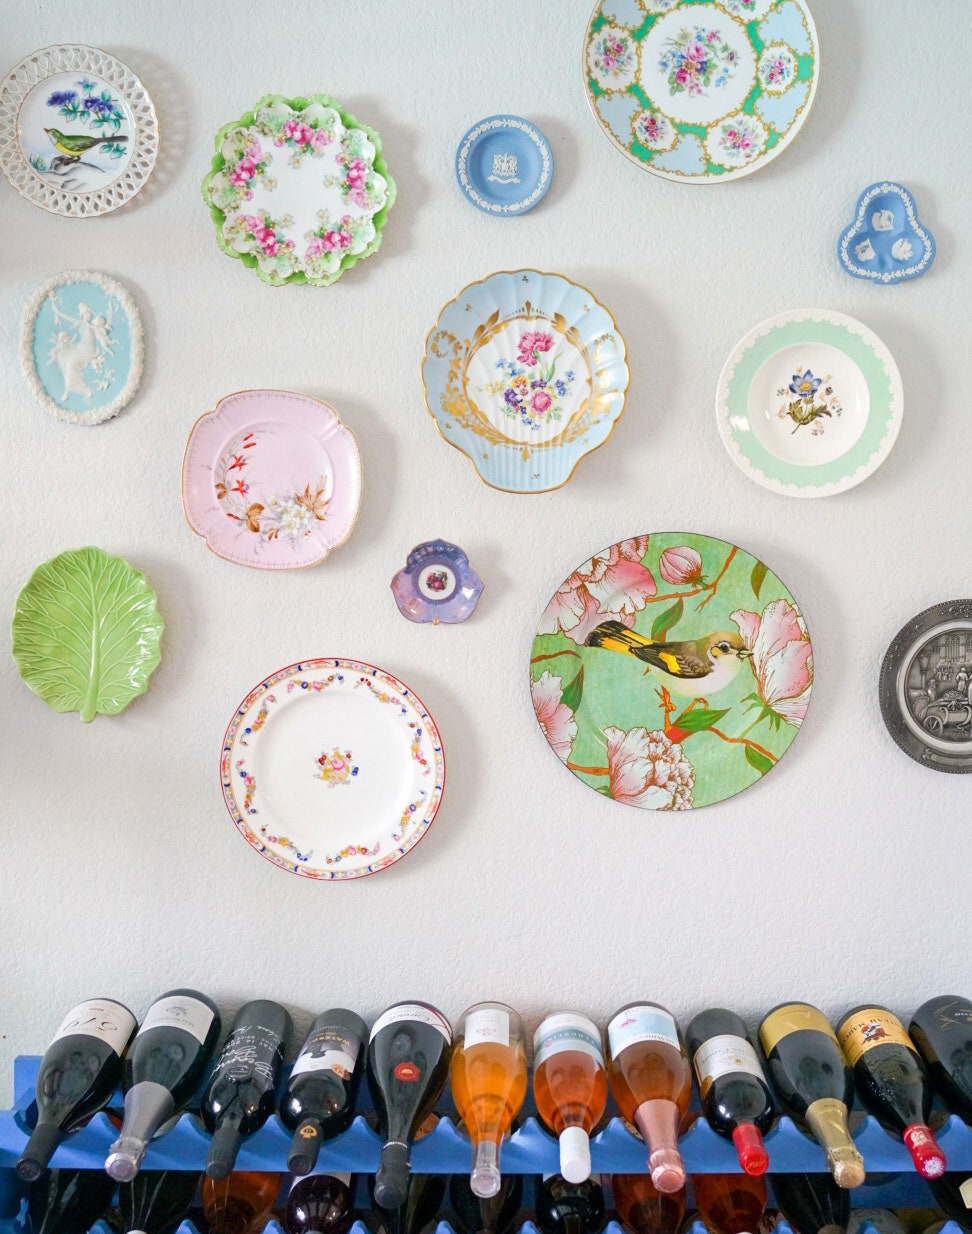 Hanging plates is a perfect idea for decorating kitchen walls.